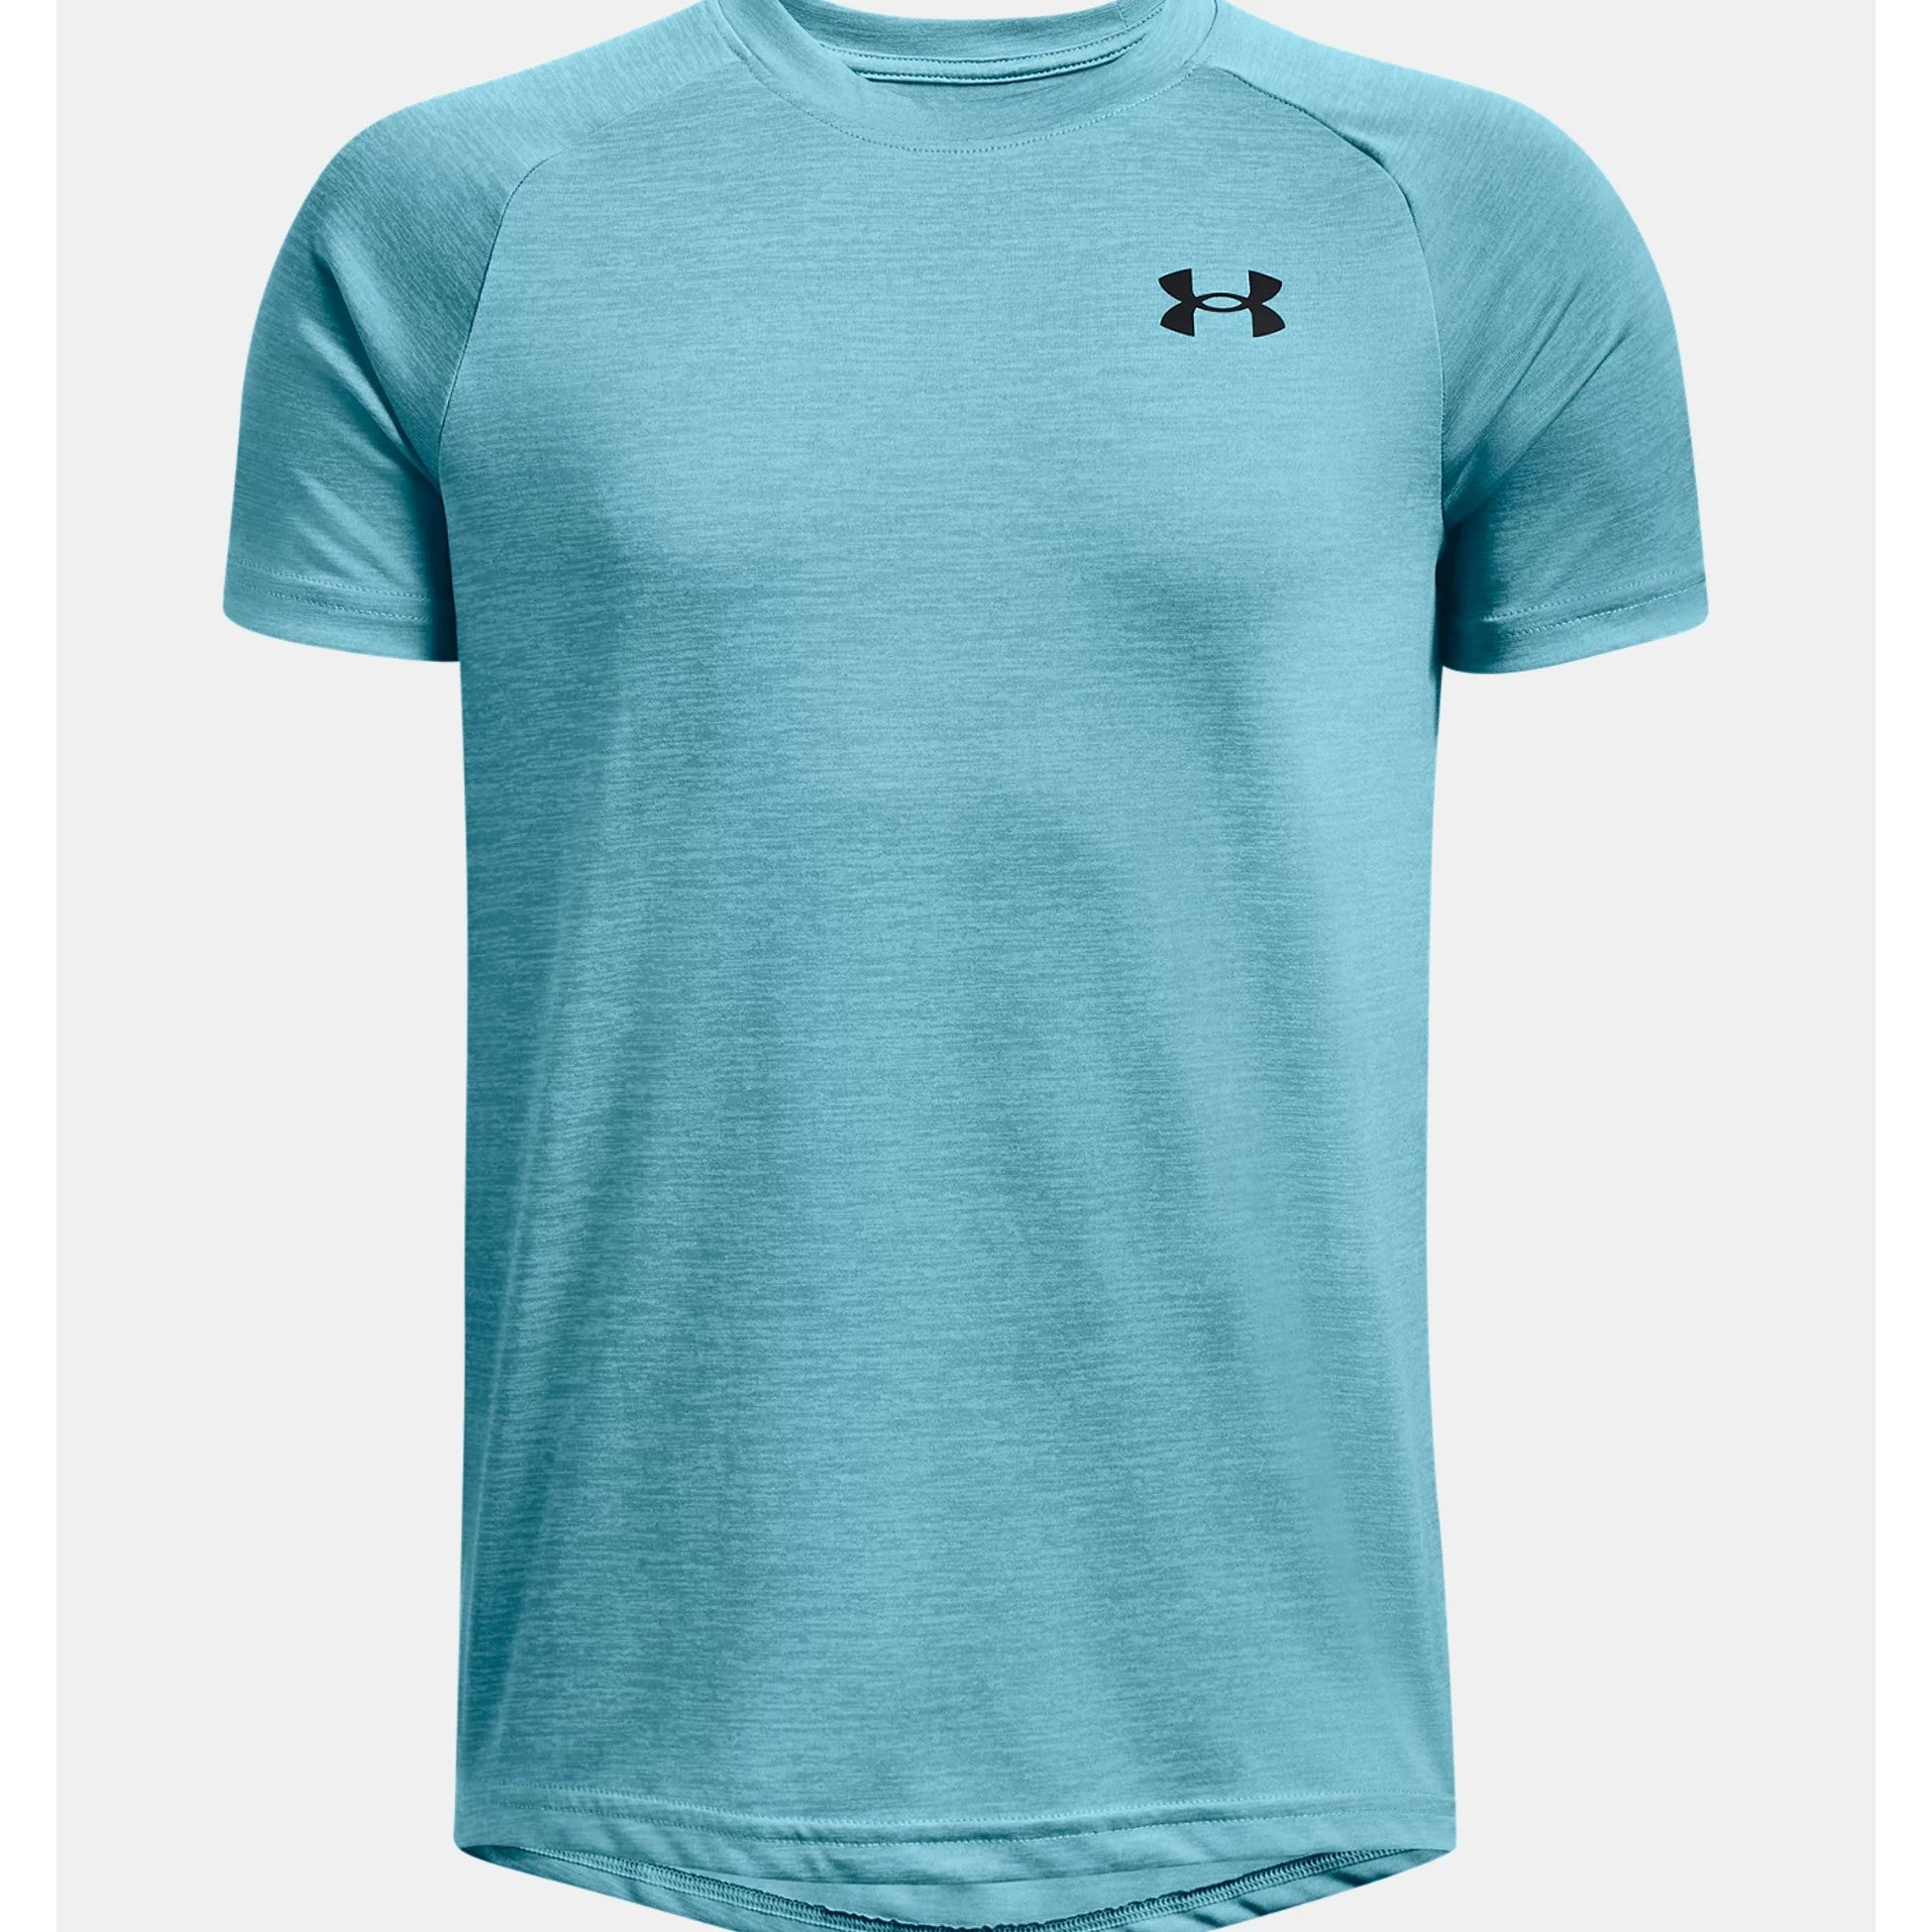 Under Armour tech 2.0 t-shirt in black